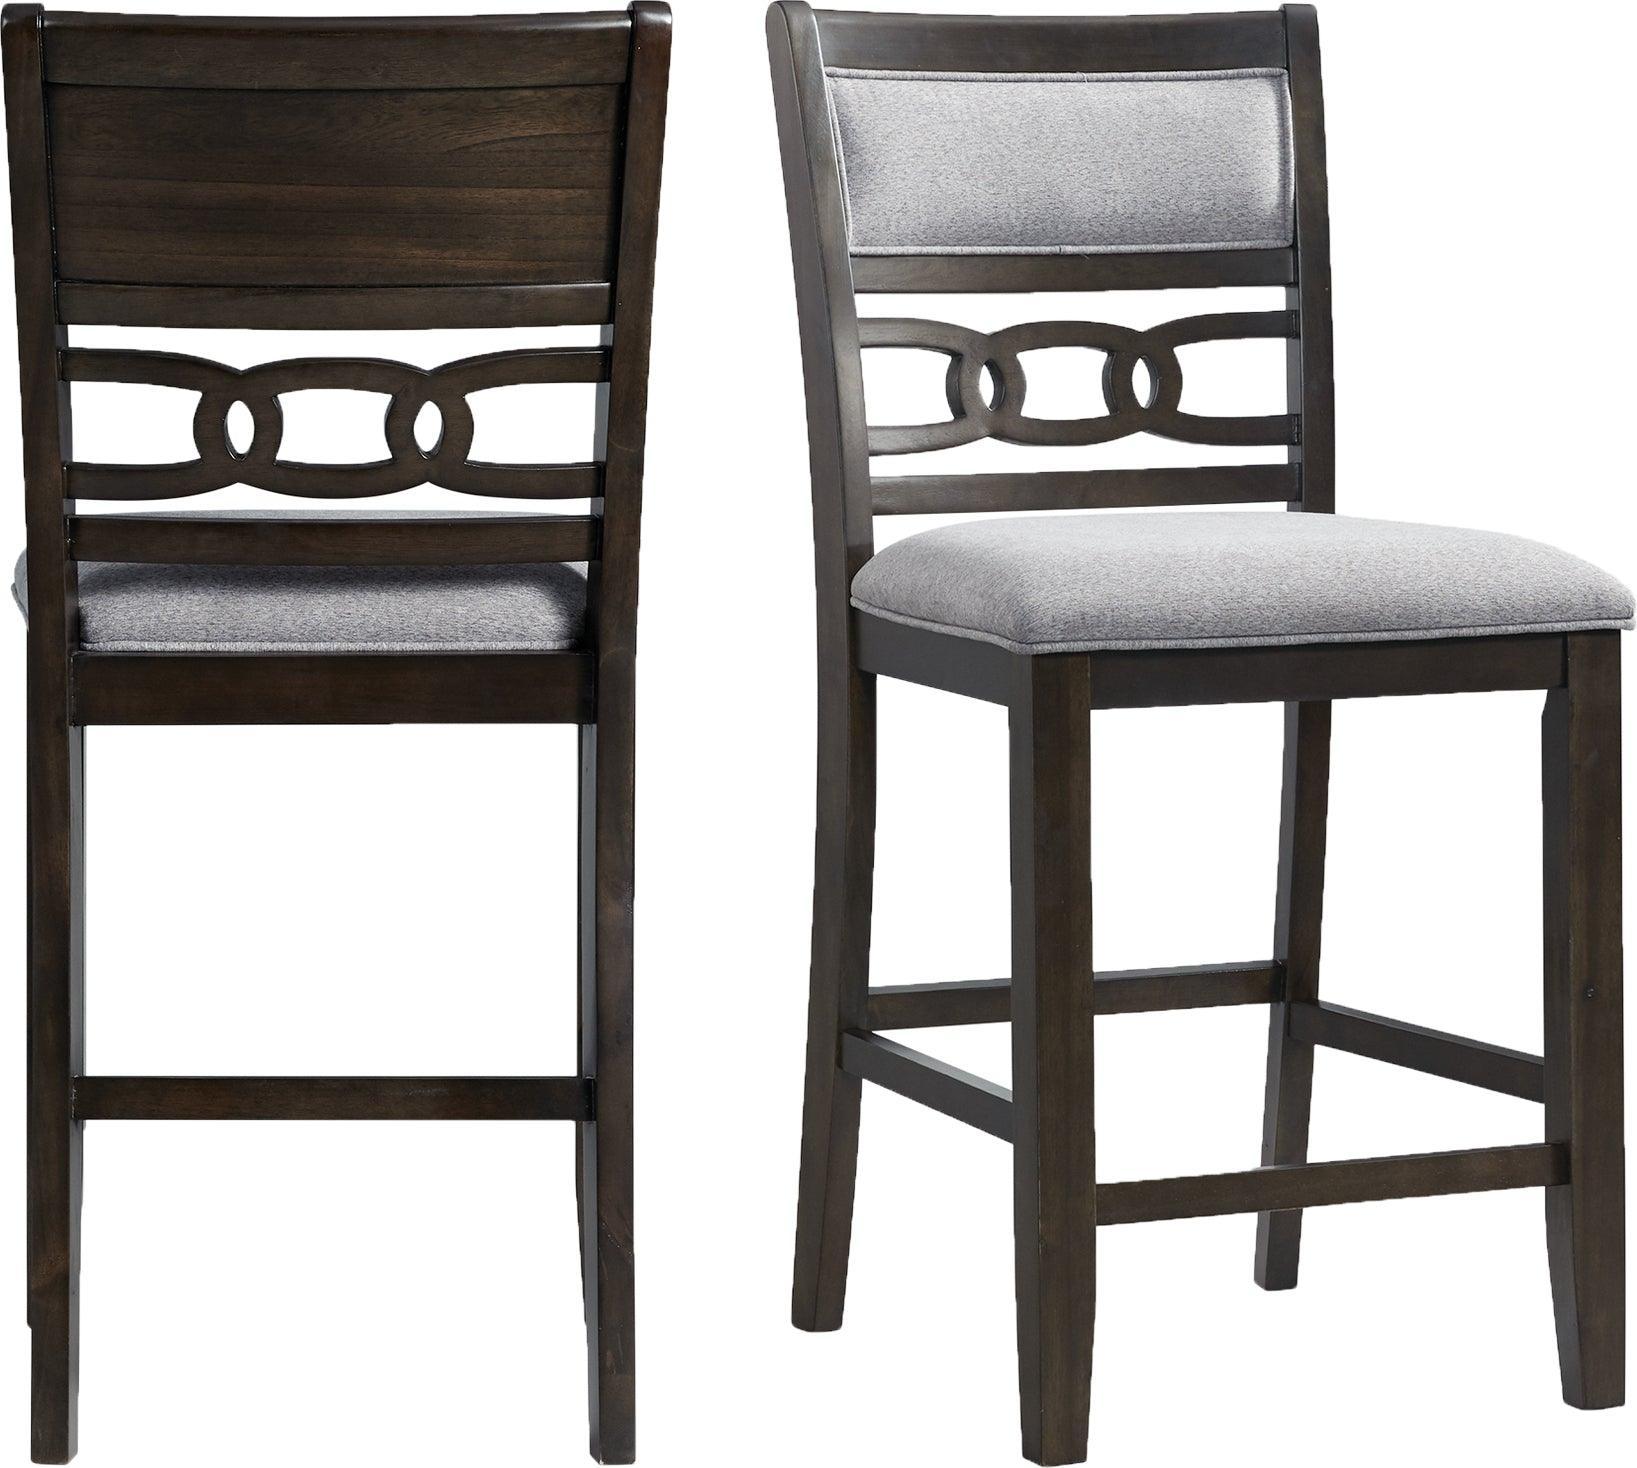 Elements Barstools - Taylor Counter Height Side Chair Set in Walnut (Set of 2)